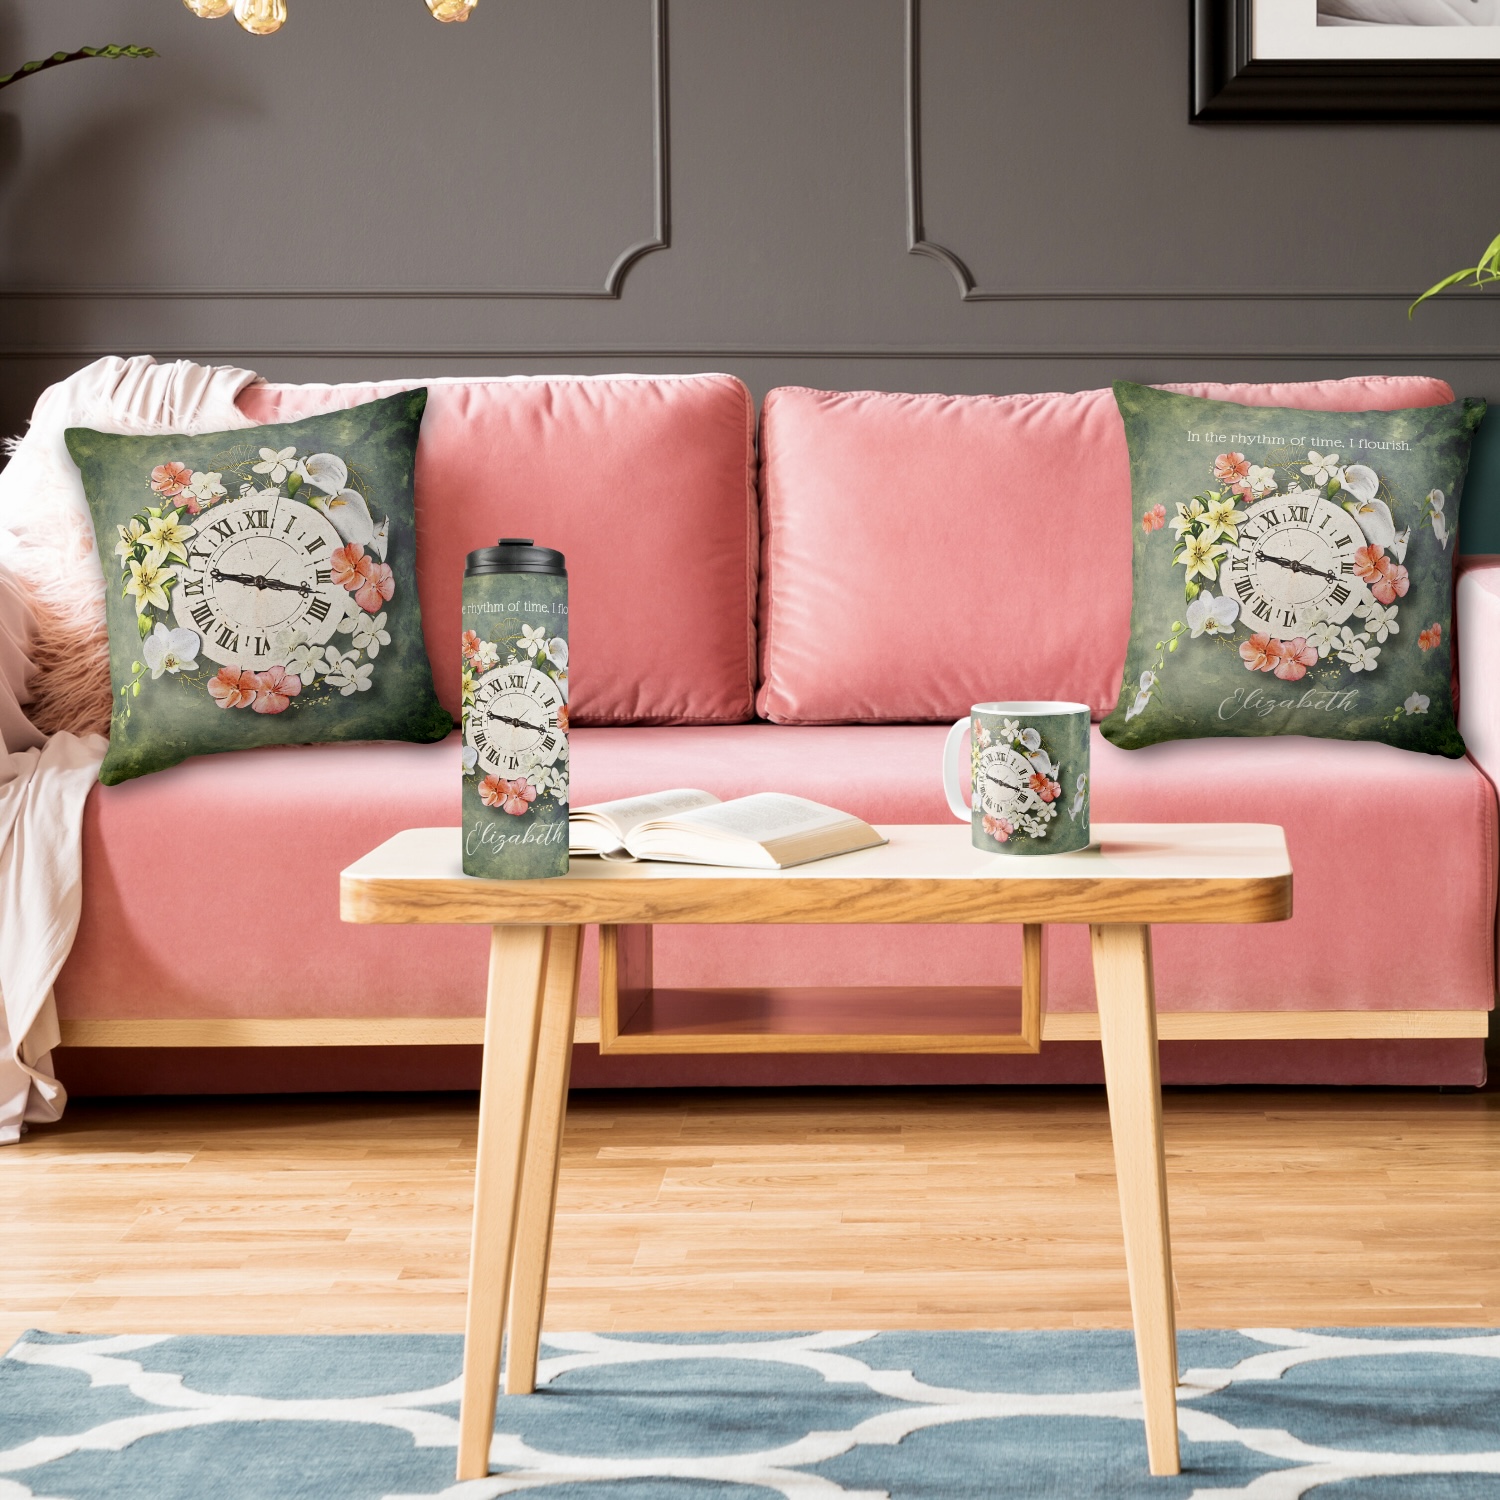 Pink living room sofa with two moss green vintage clock pillows, and a mug and tumbler set with same design.